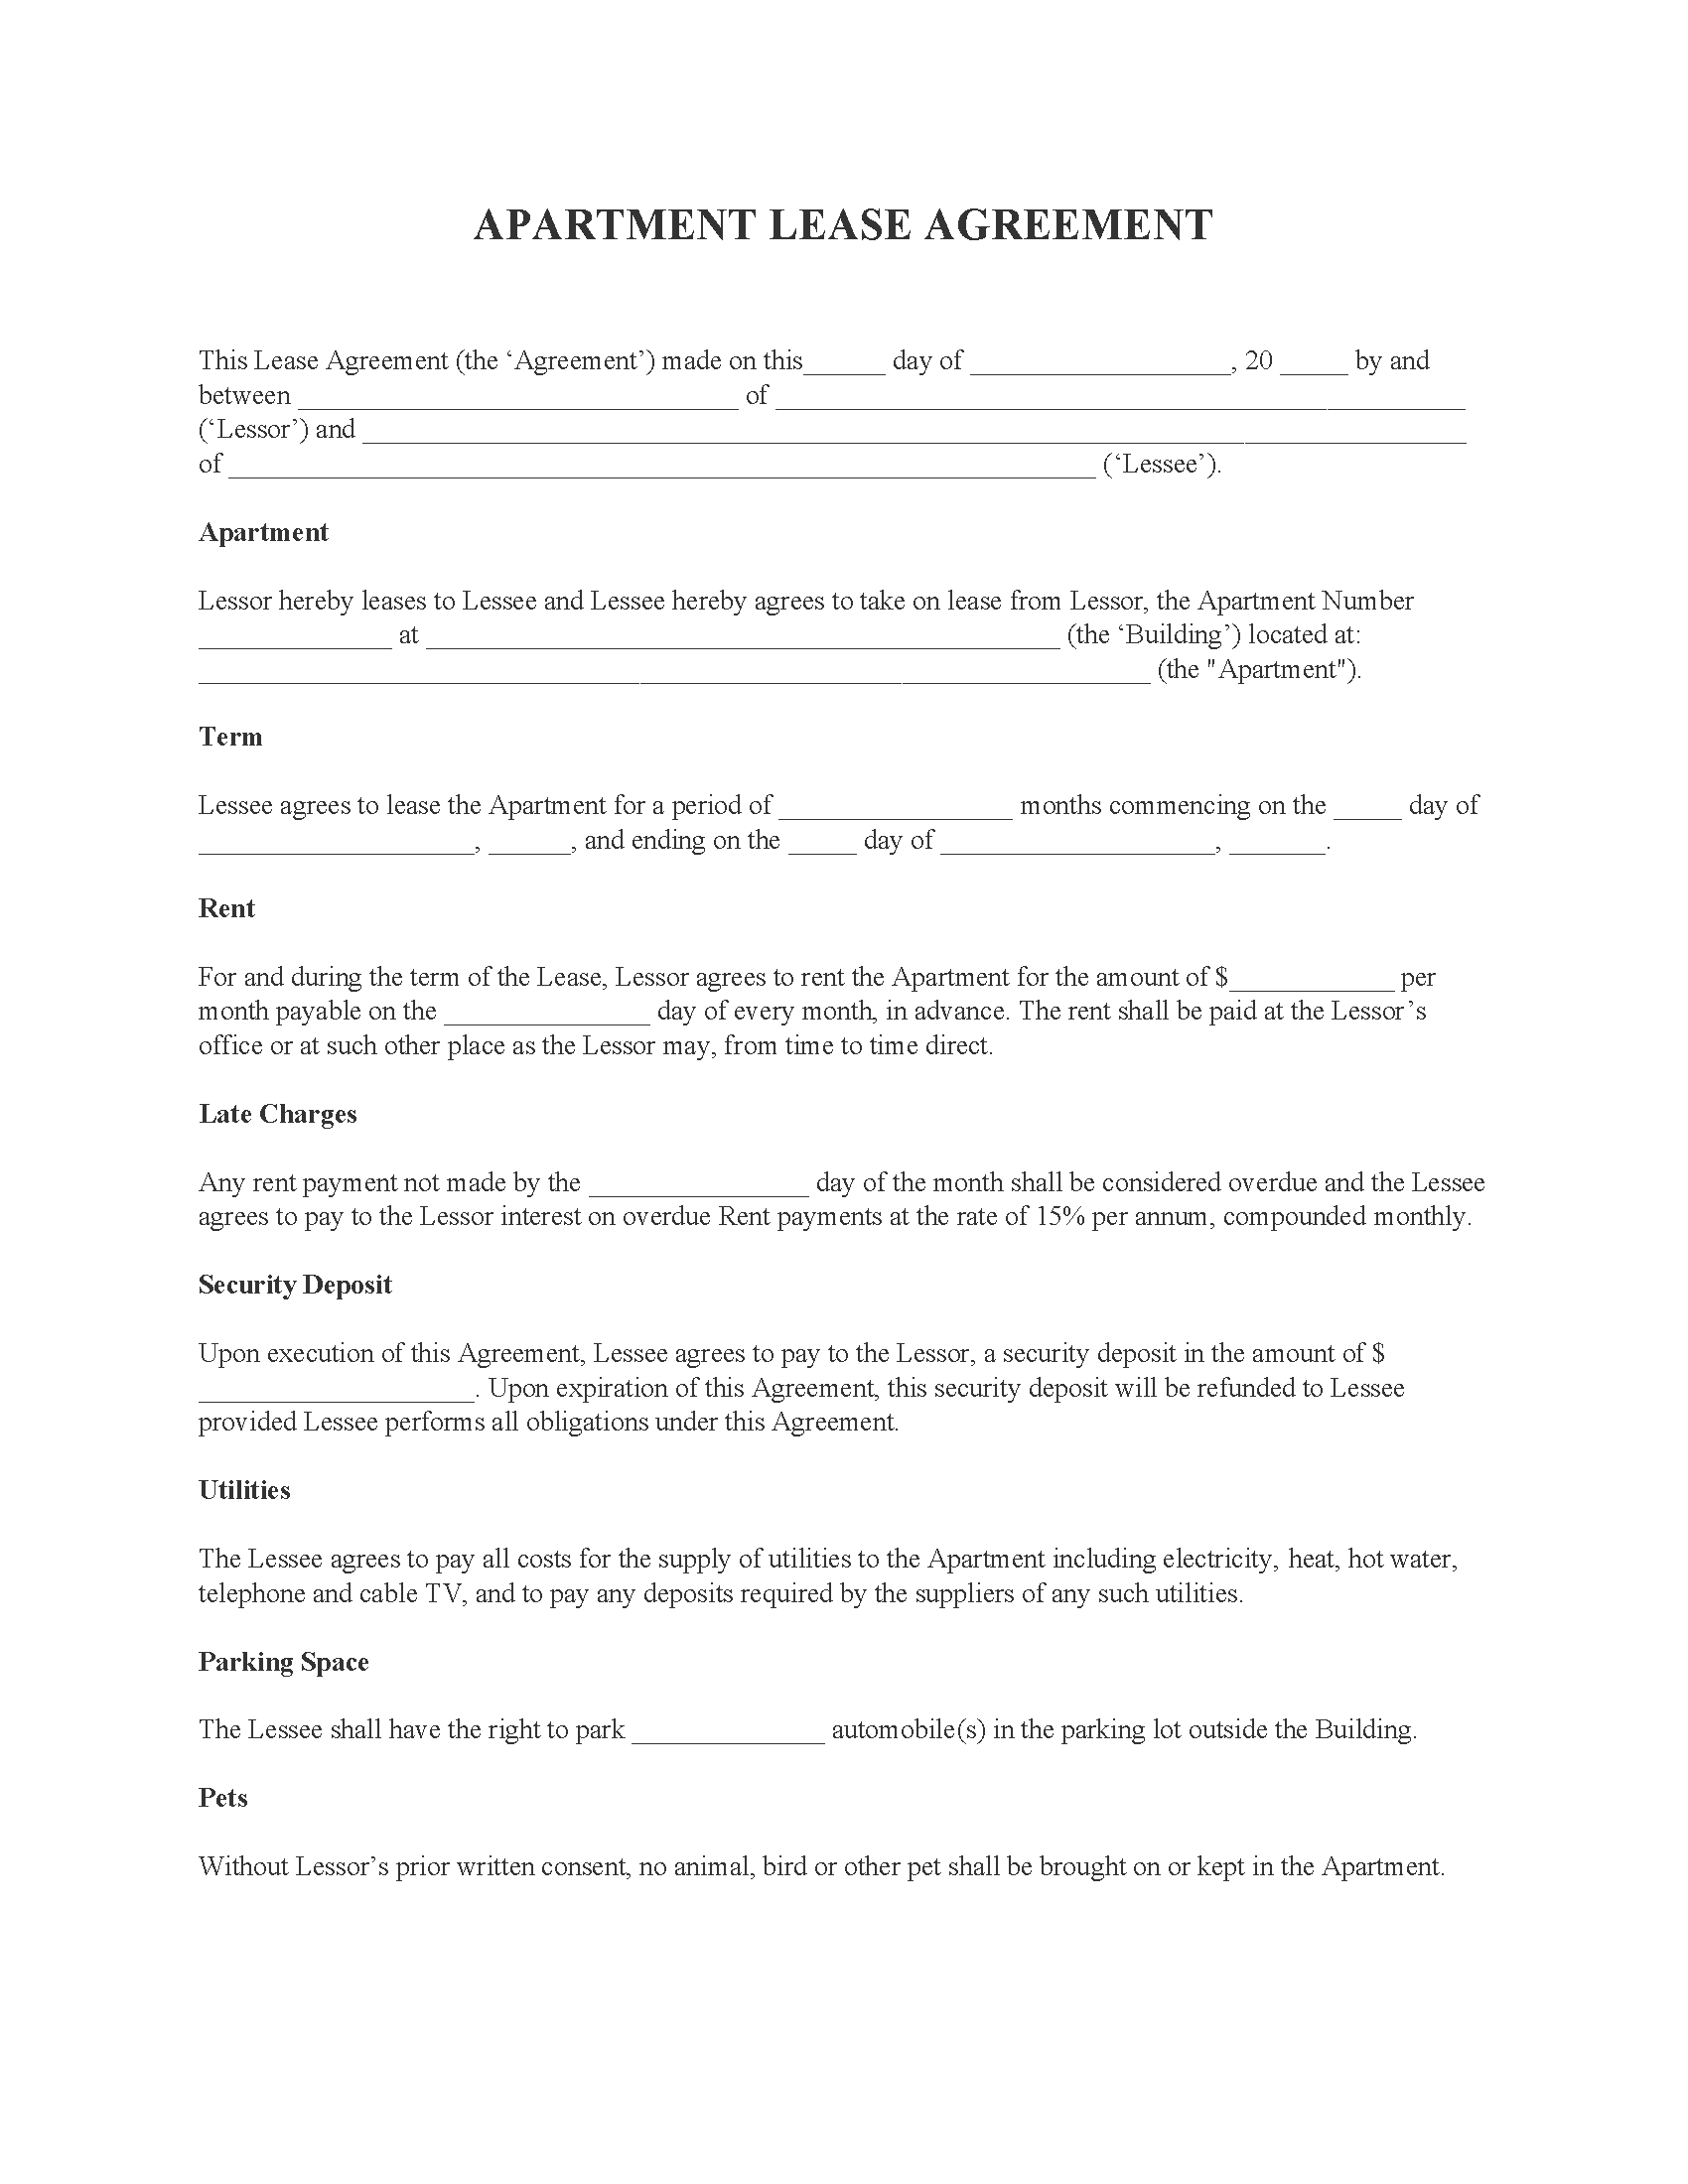 Free Printable Apartment Lease Agreement